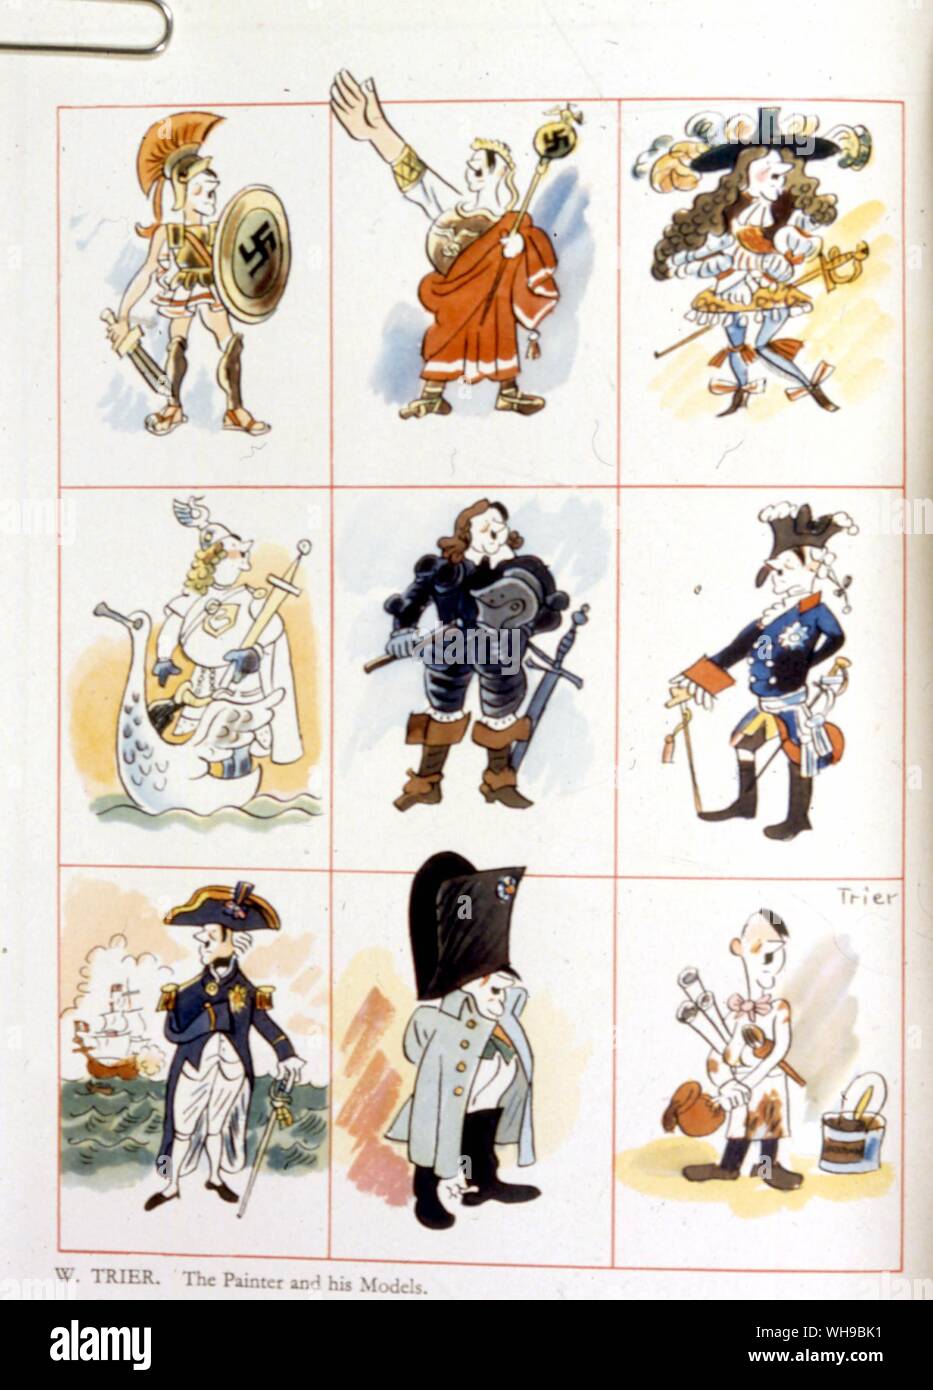 Cartoon illustrations of people from history by W Trier. Including Julius Caesar, Nelson, Hitler, Napoleon, Boadicea. Stock Photo